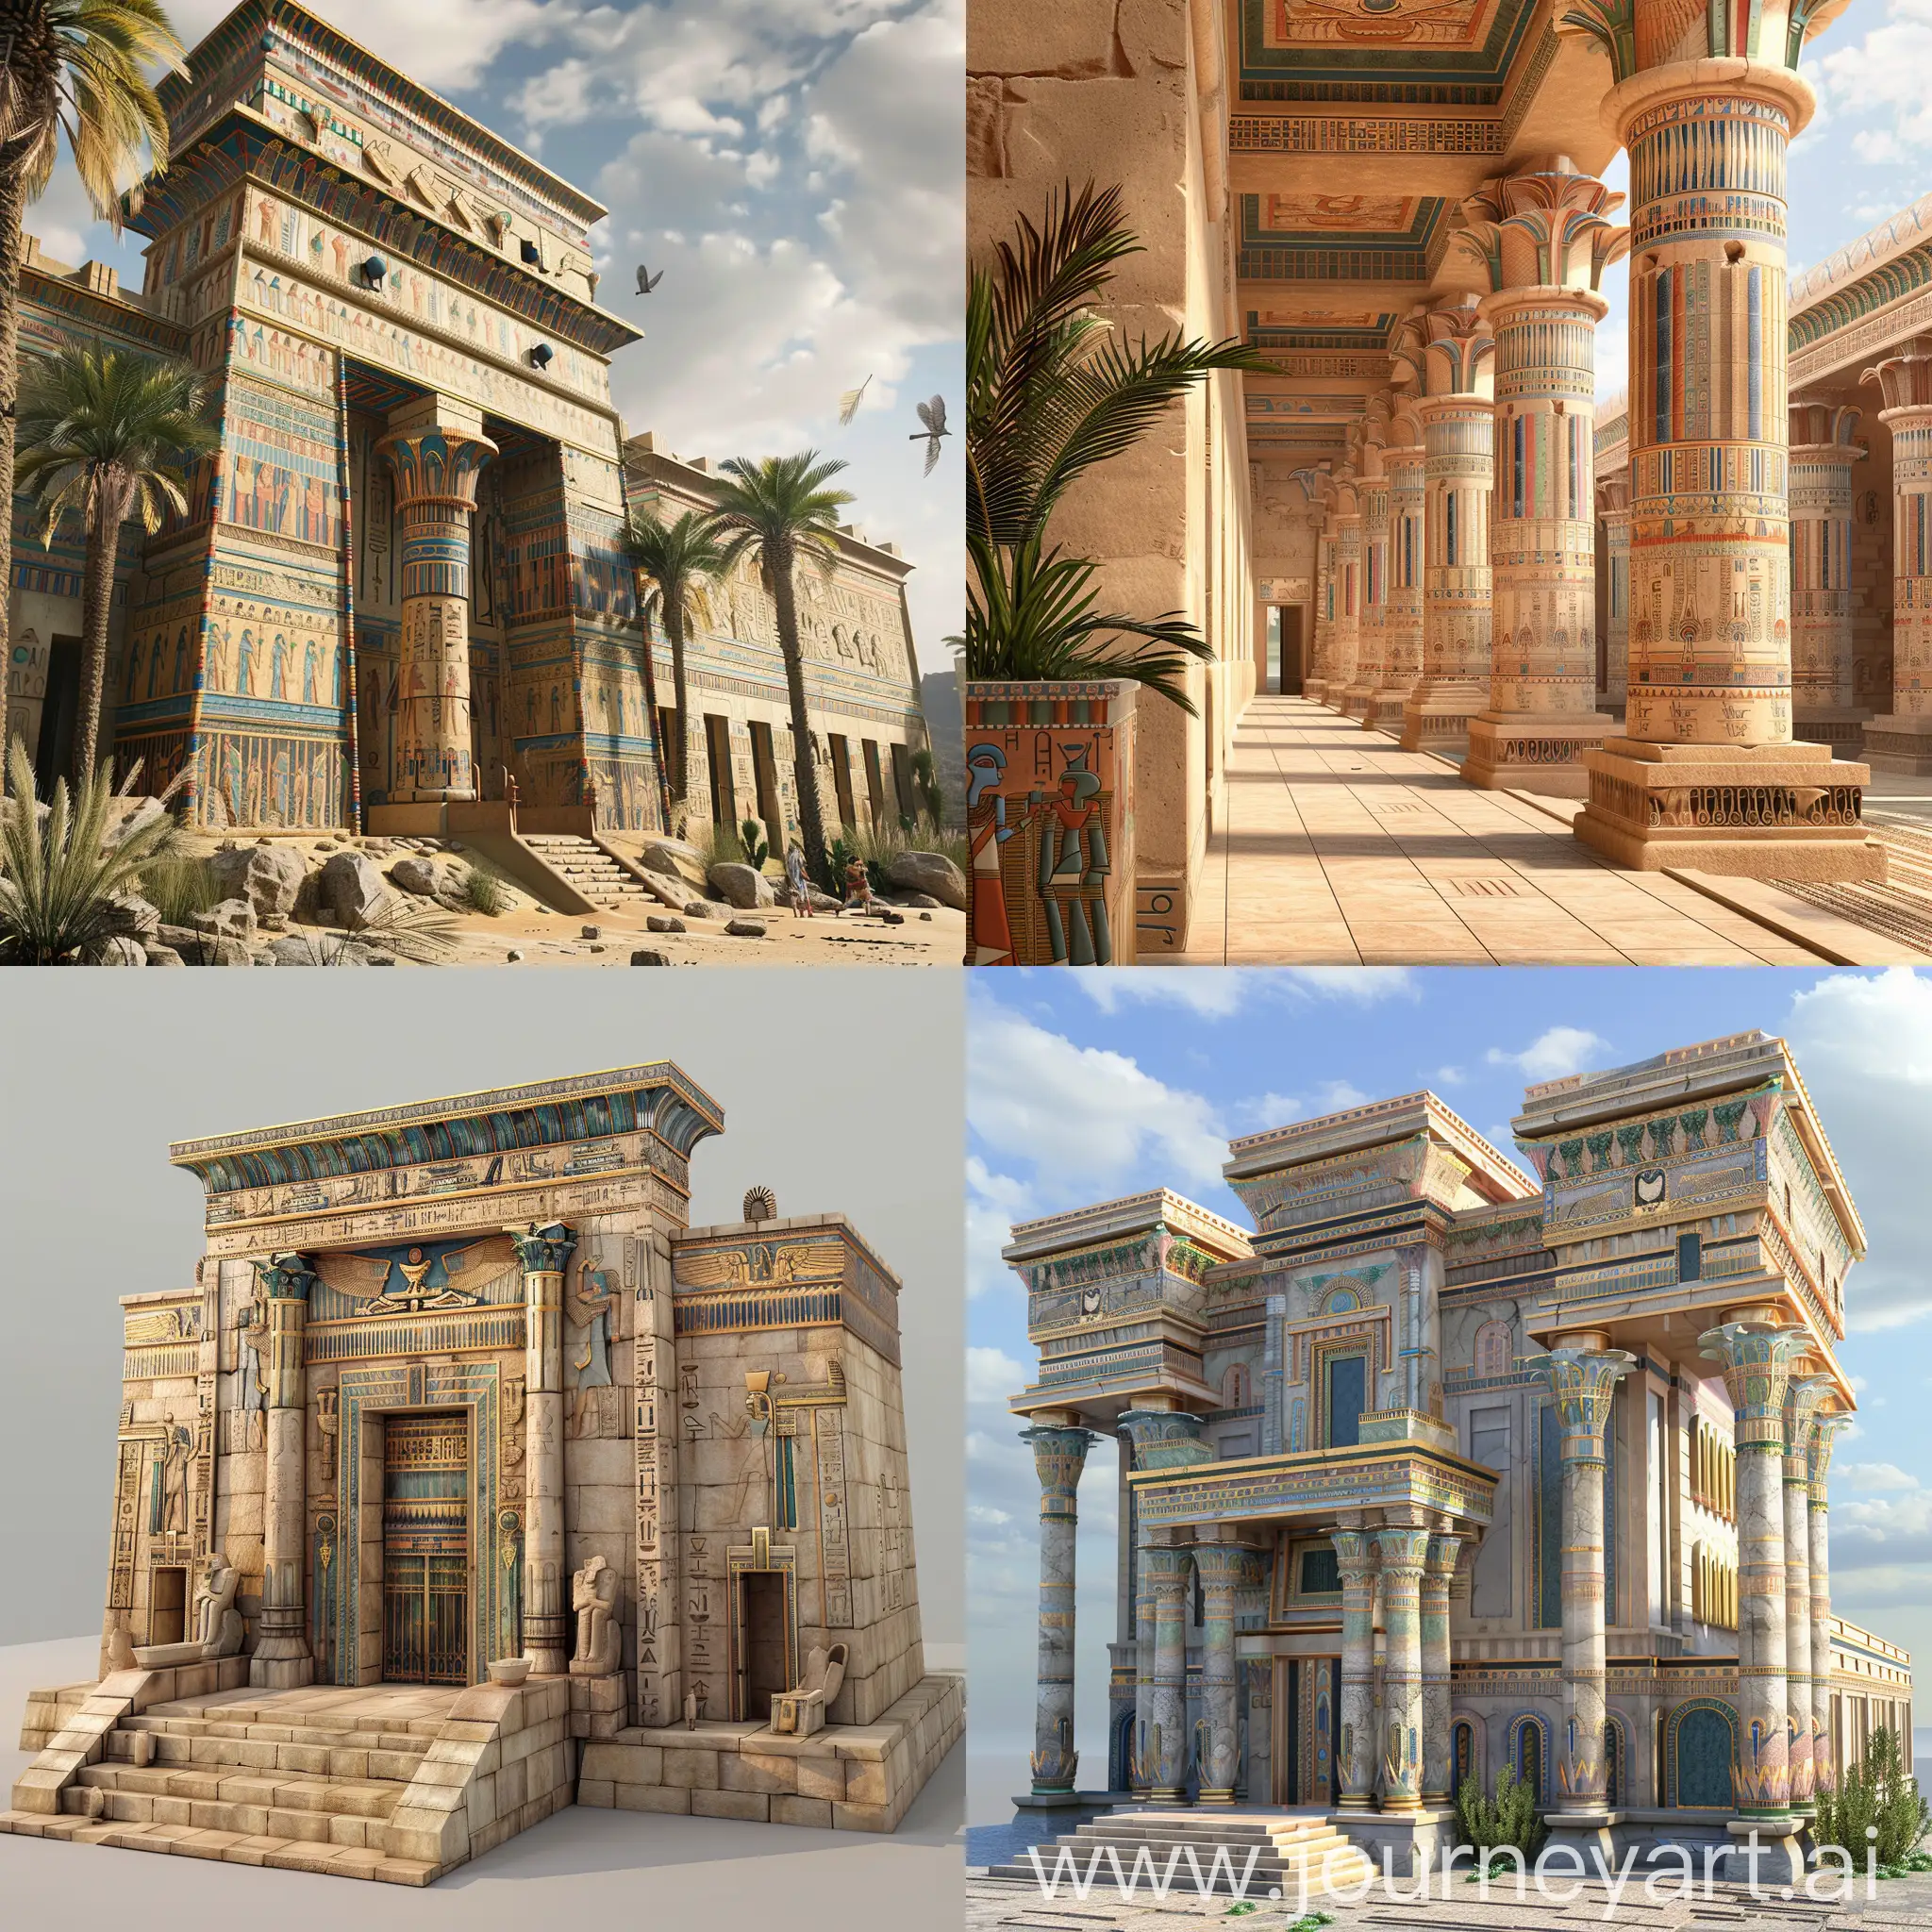 Ancient-Egyptian-Style-Building-Architecture